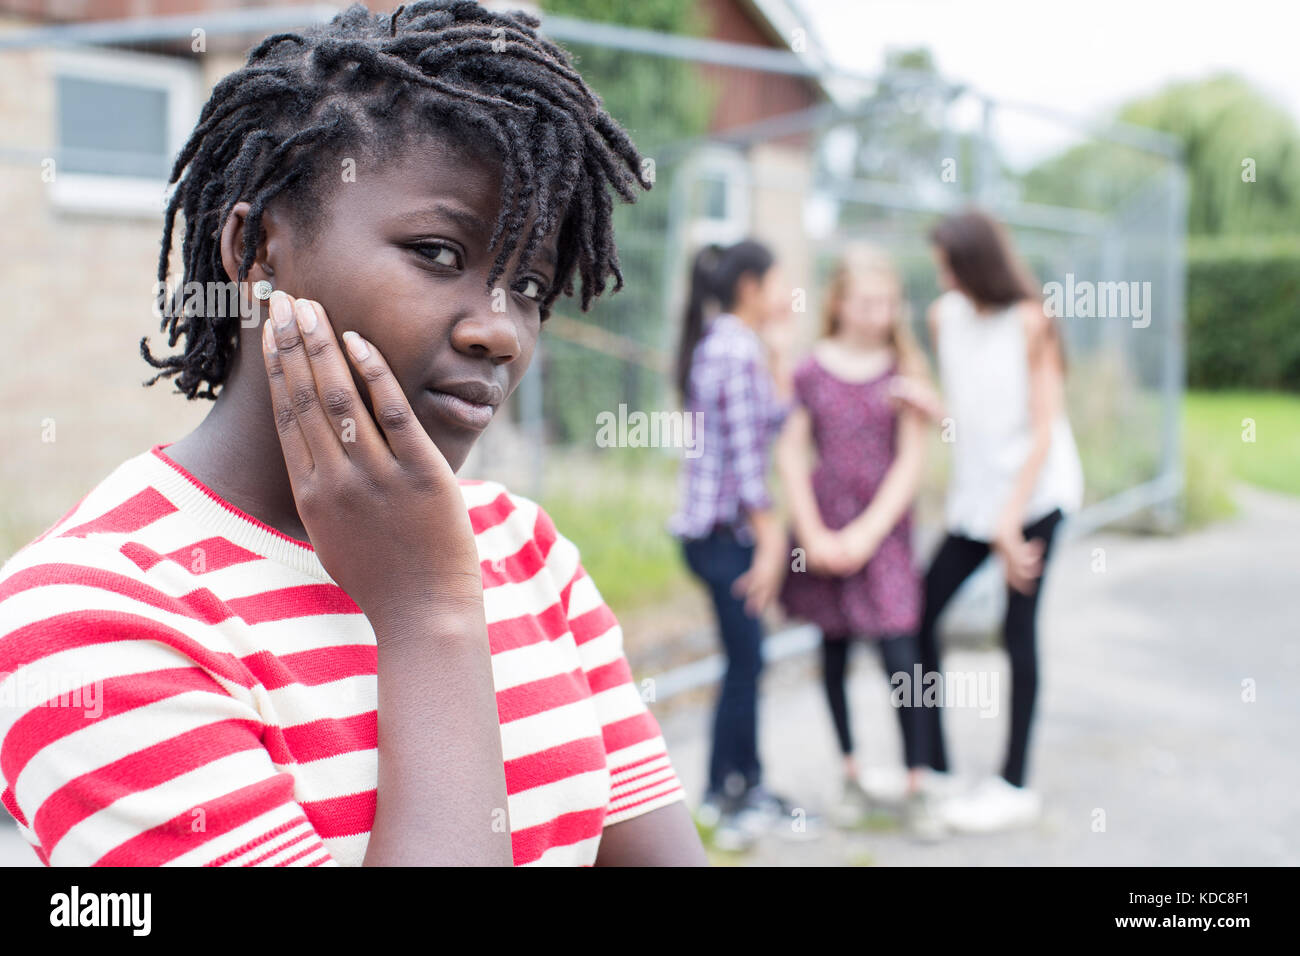 Portrait Of Sad Teenage Girl Feeling Left Out By Friends Stock Photo